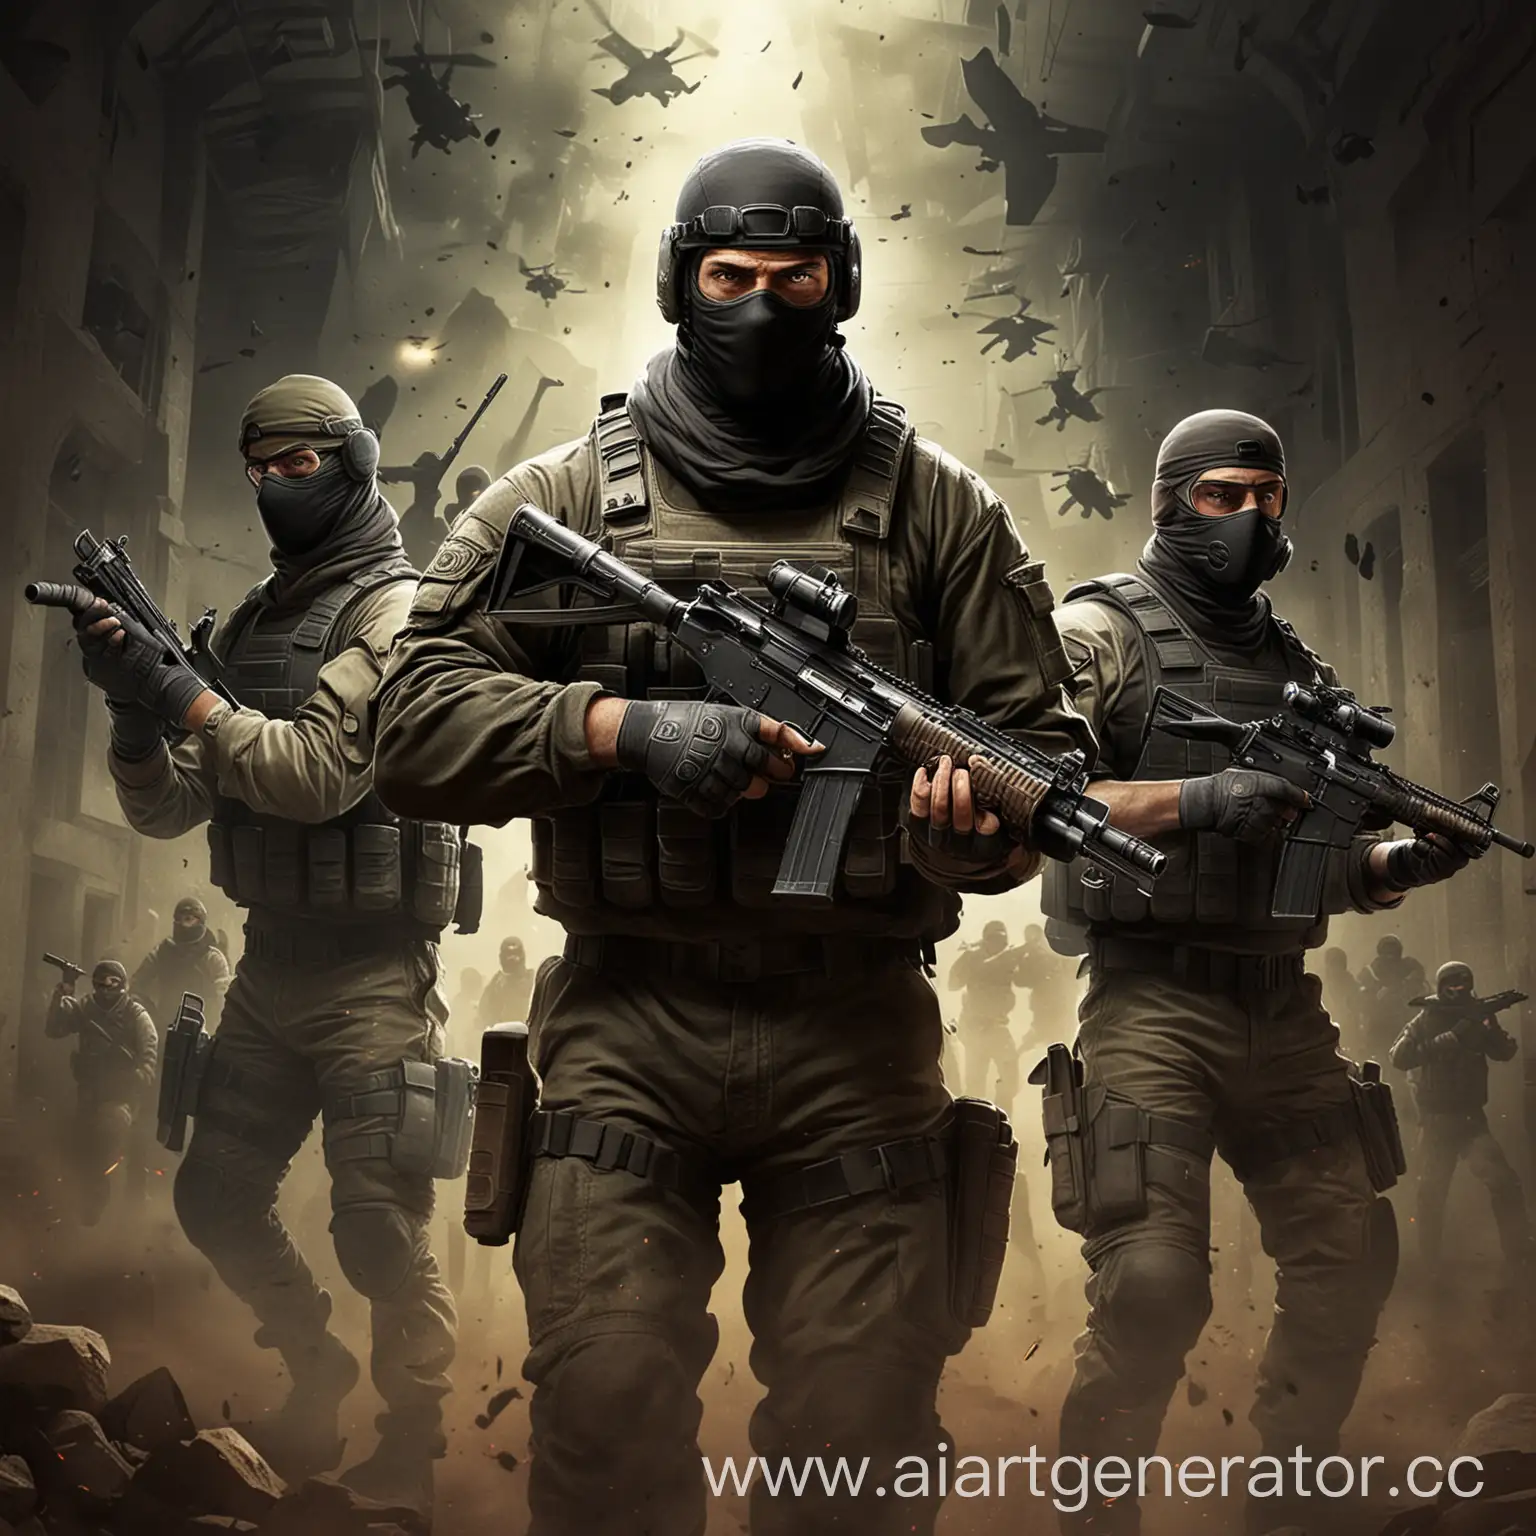 Counter-Strike-Revised-Game-Poster-Intense-Combat-Action-in-Futuristic-Battlefield